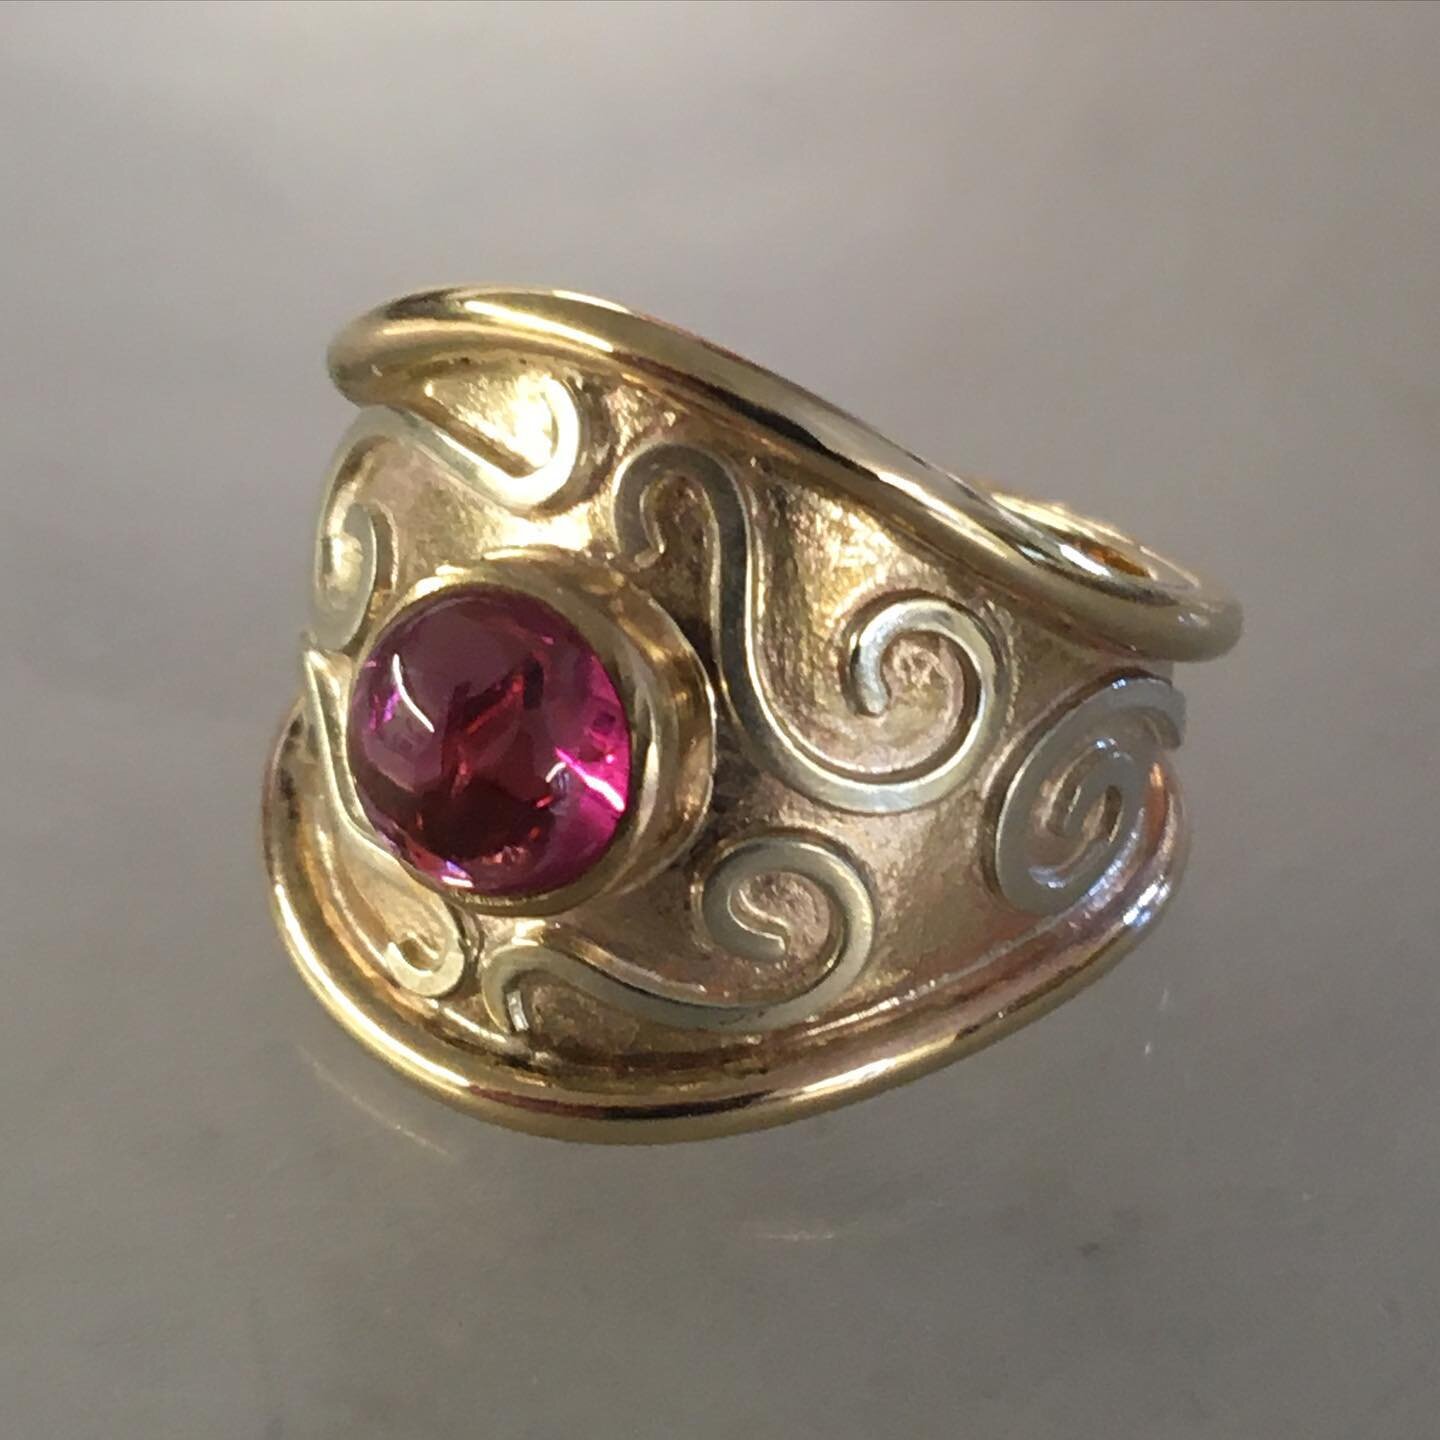 9ct yellow and white gold ring with a pink tourmaline. For sale in the gallery.
#goldring #pinktourmaline  #handmadejewelery #rings #onmybench